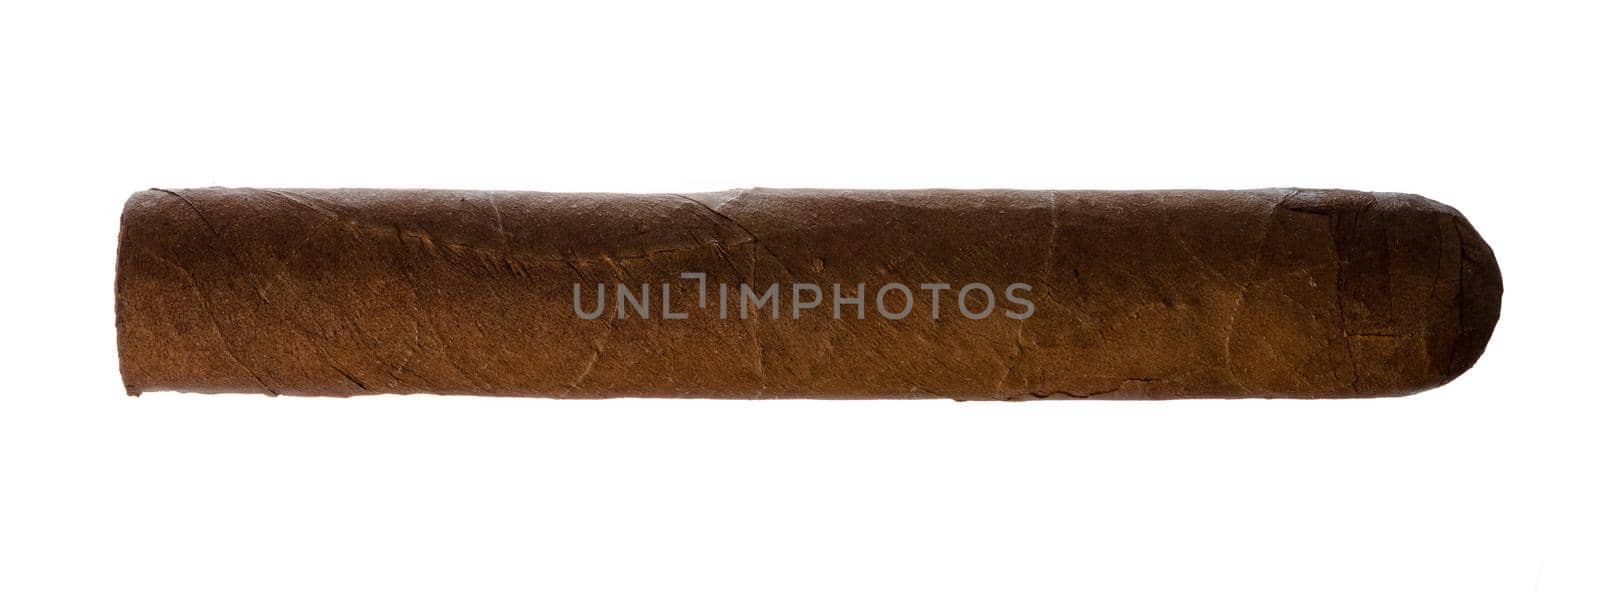 One hand rolled cigar isolated on white by Fabrikasimf